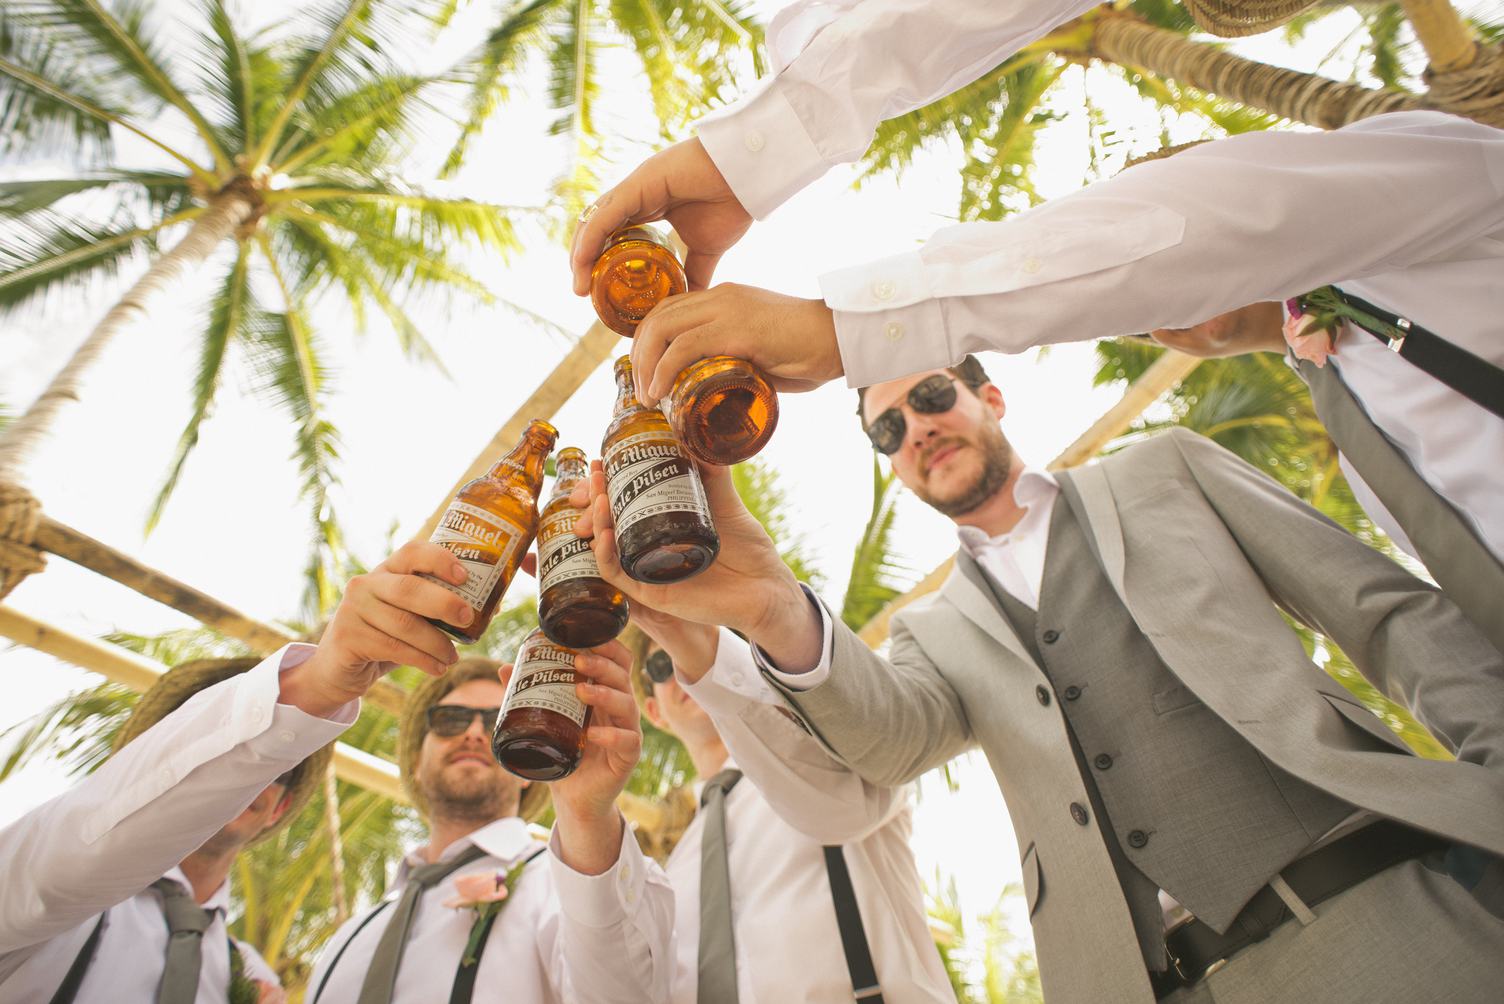 Men Drinking Beer under the Palmtrees During the Wedding Party